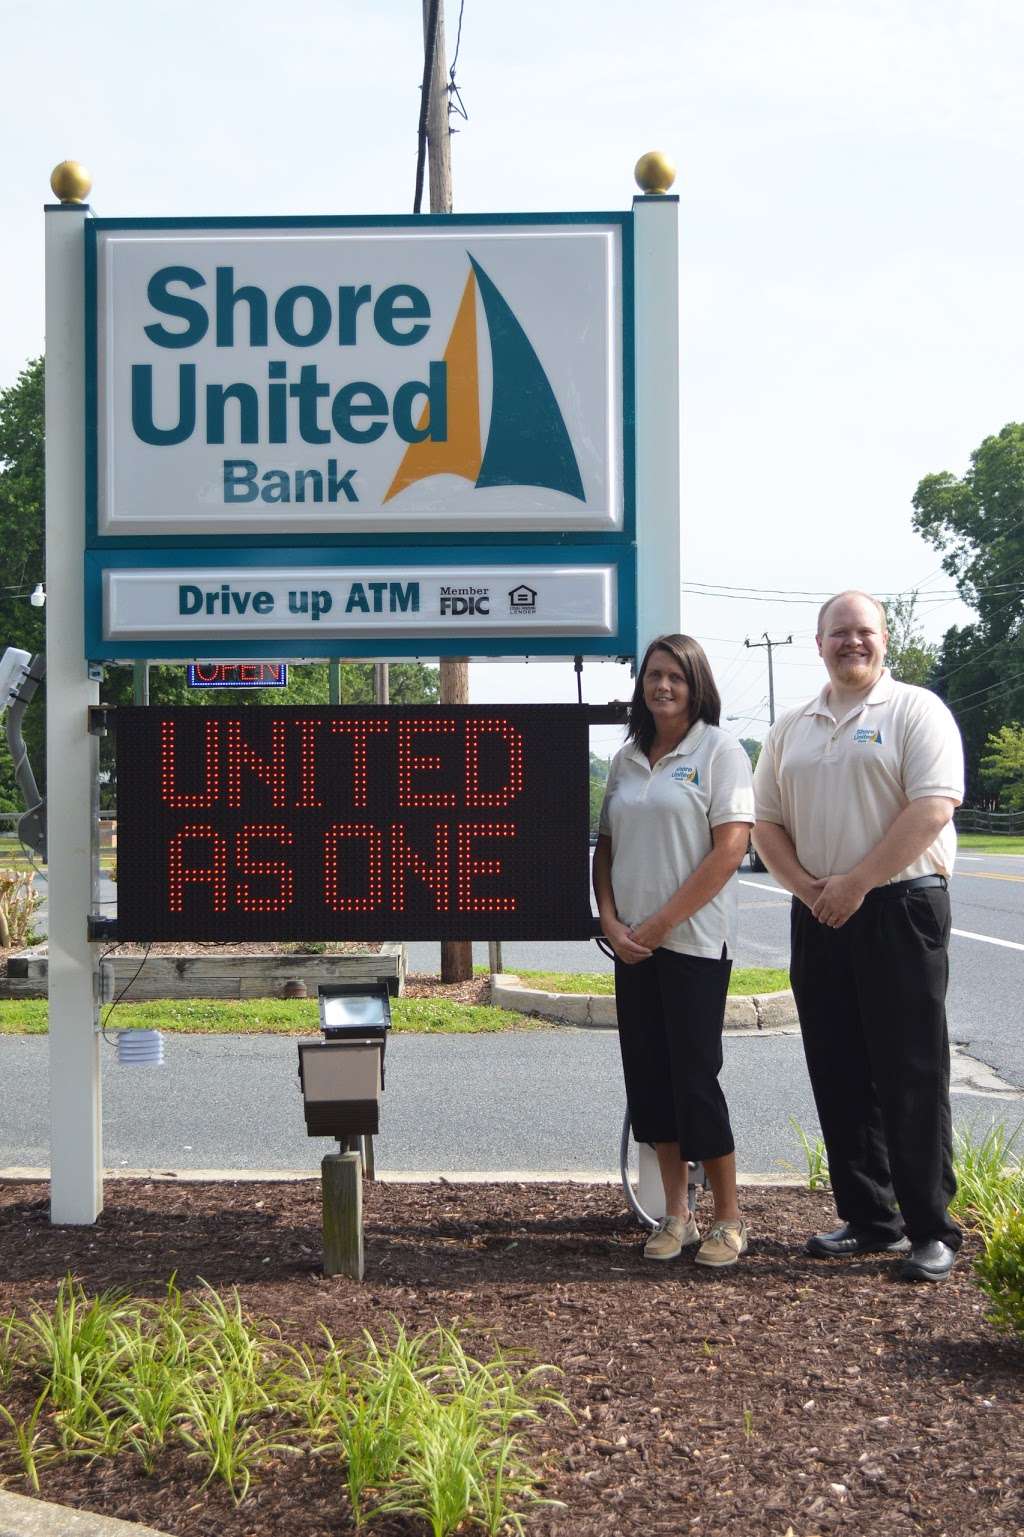 Shore United Bank | 2609 Centreville Rd, Centreville, MD 21617 | Phone: (410) 758-2414